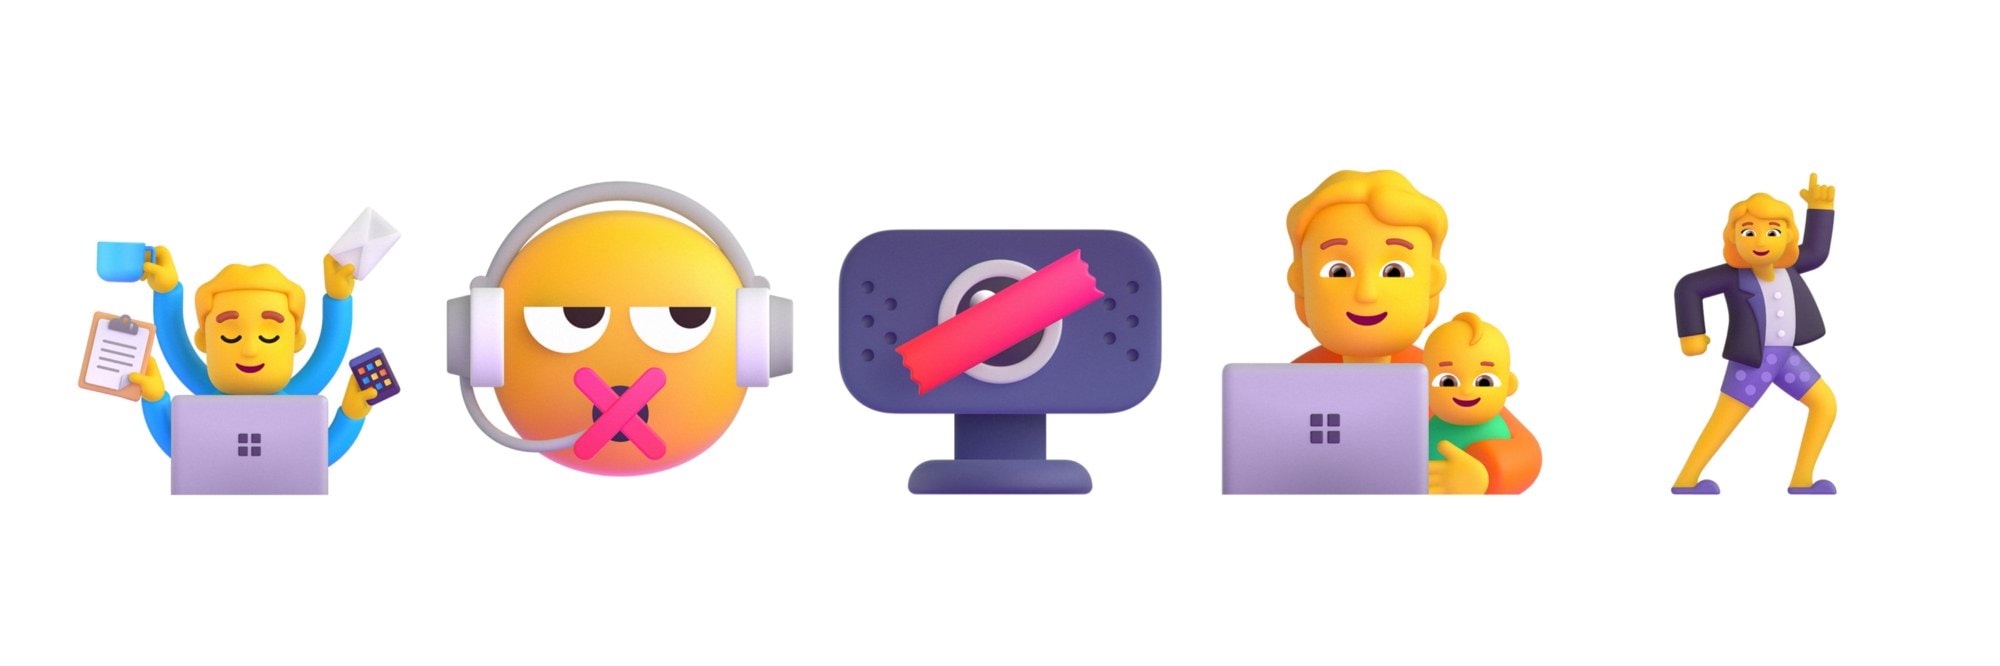 Concept design for workplace appropriate emojis. Image: Microsoft